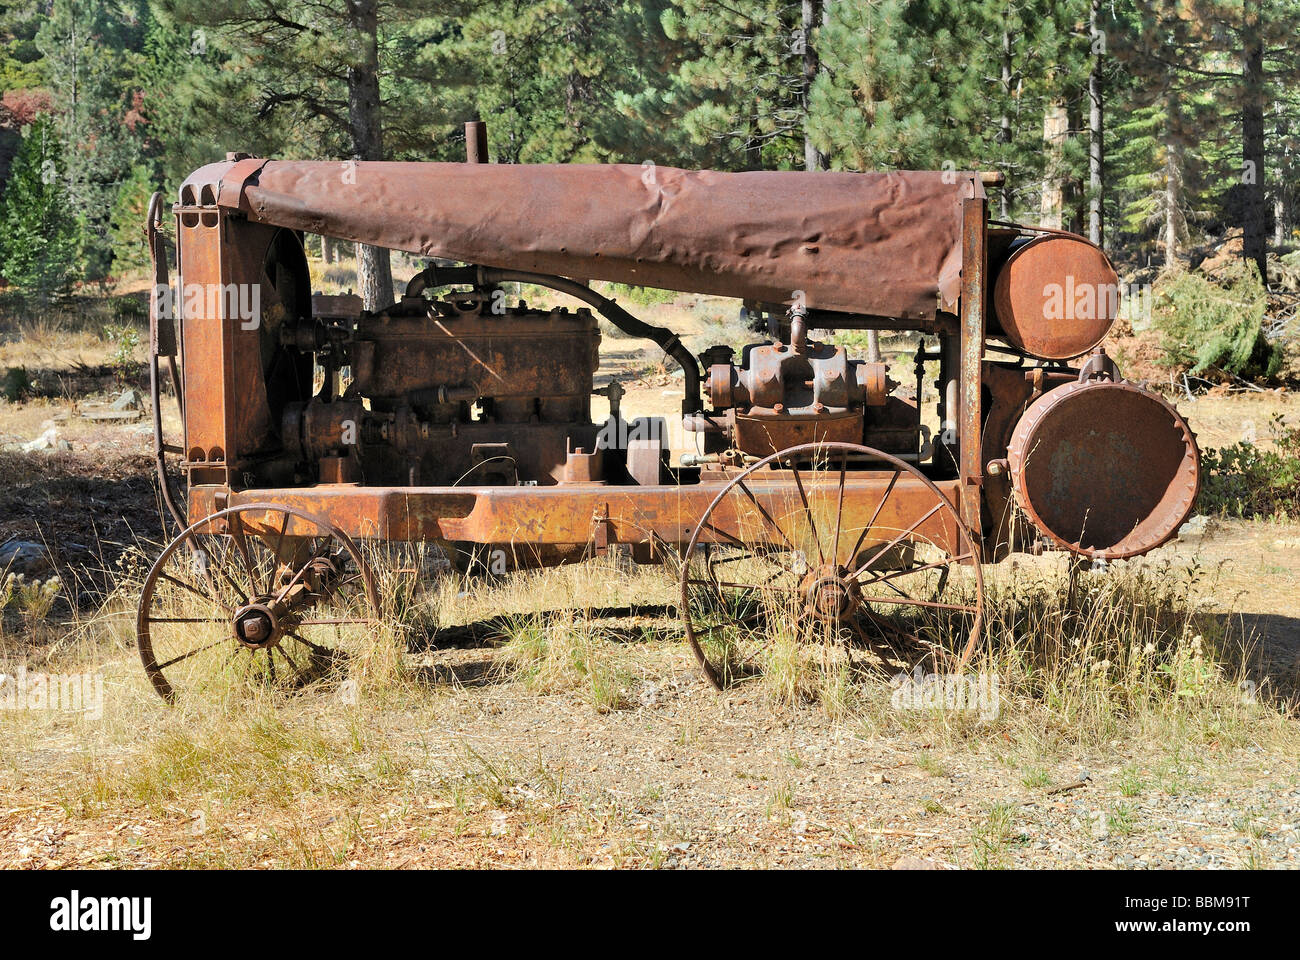 Historic air compressor, gas-operated, Sullivan brand for big pneumatic drills, mining museum of the Johnsville goldmine, Calif Stock Photo